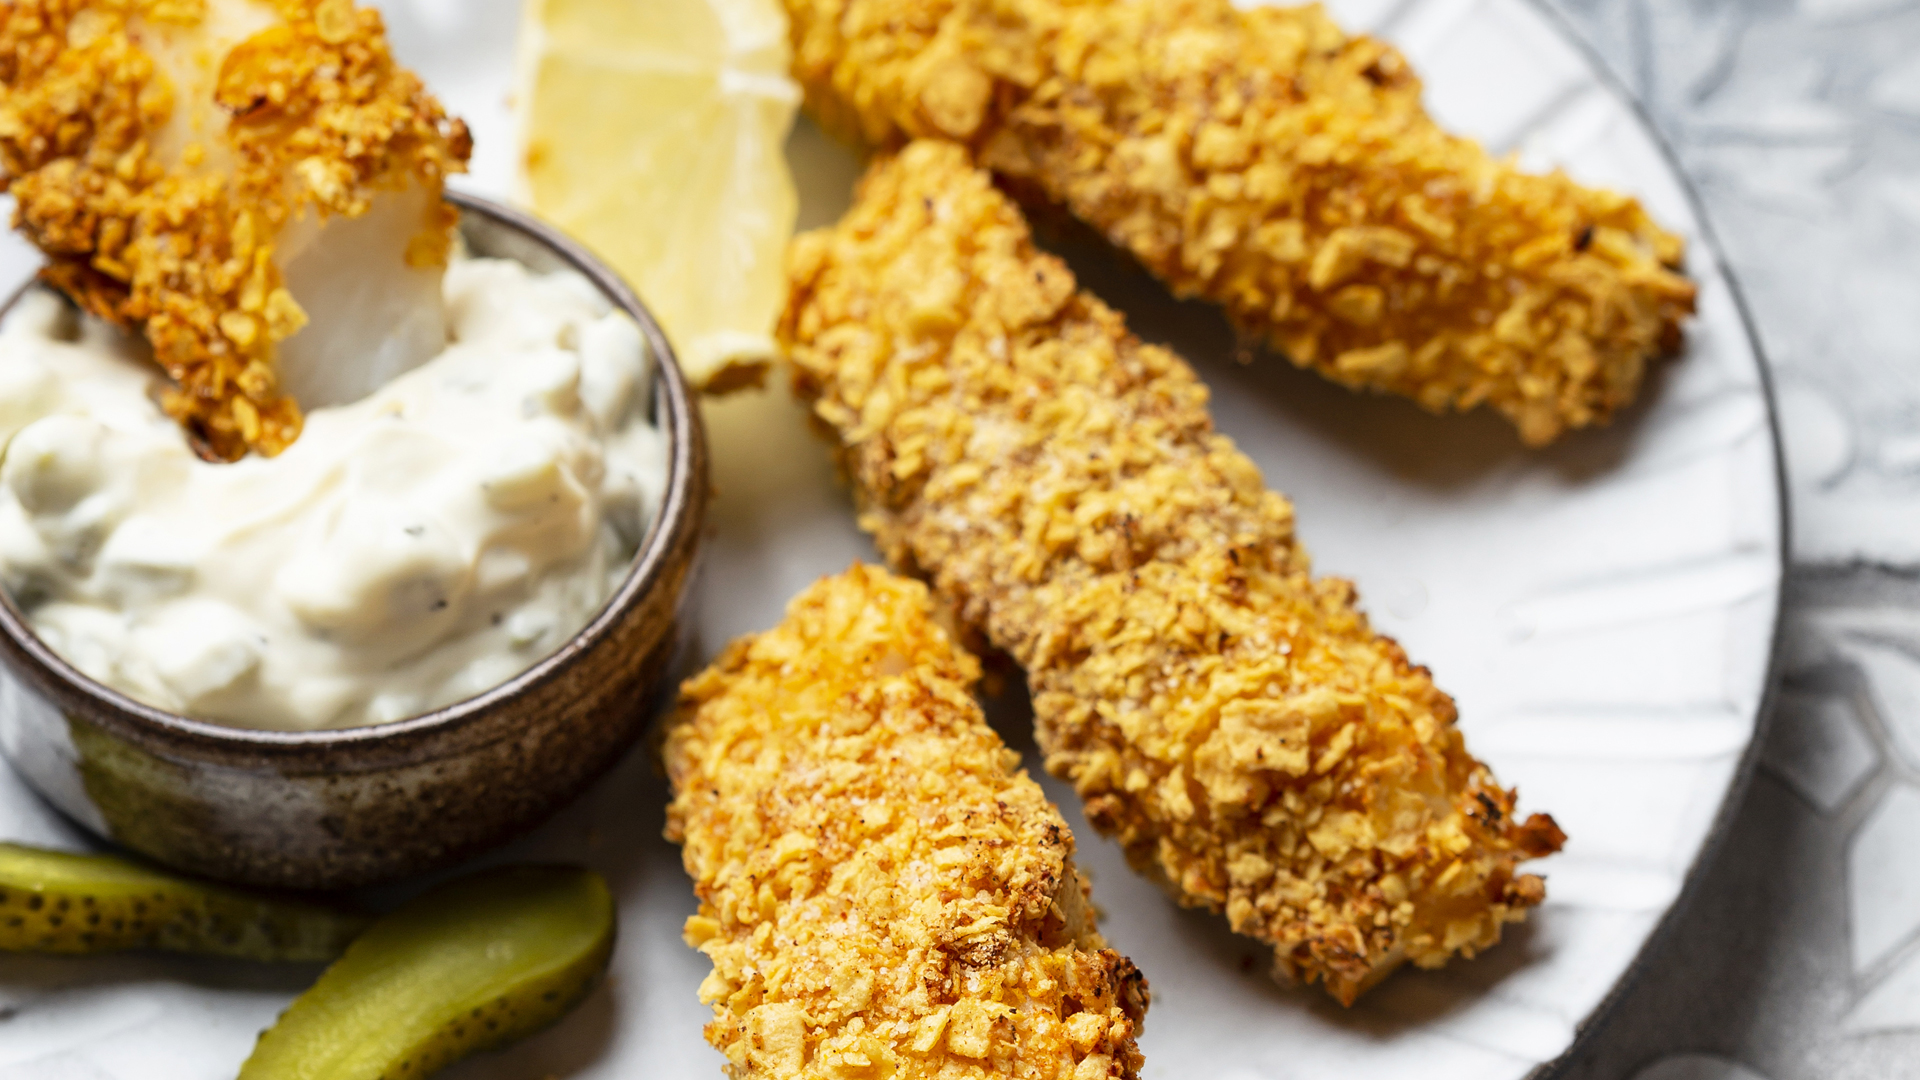 Kids who need to eat gluten-free will love these crumbed fish fingers served with homemade vegetable chips.